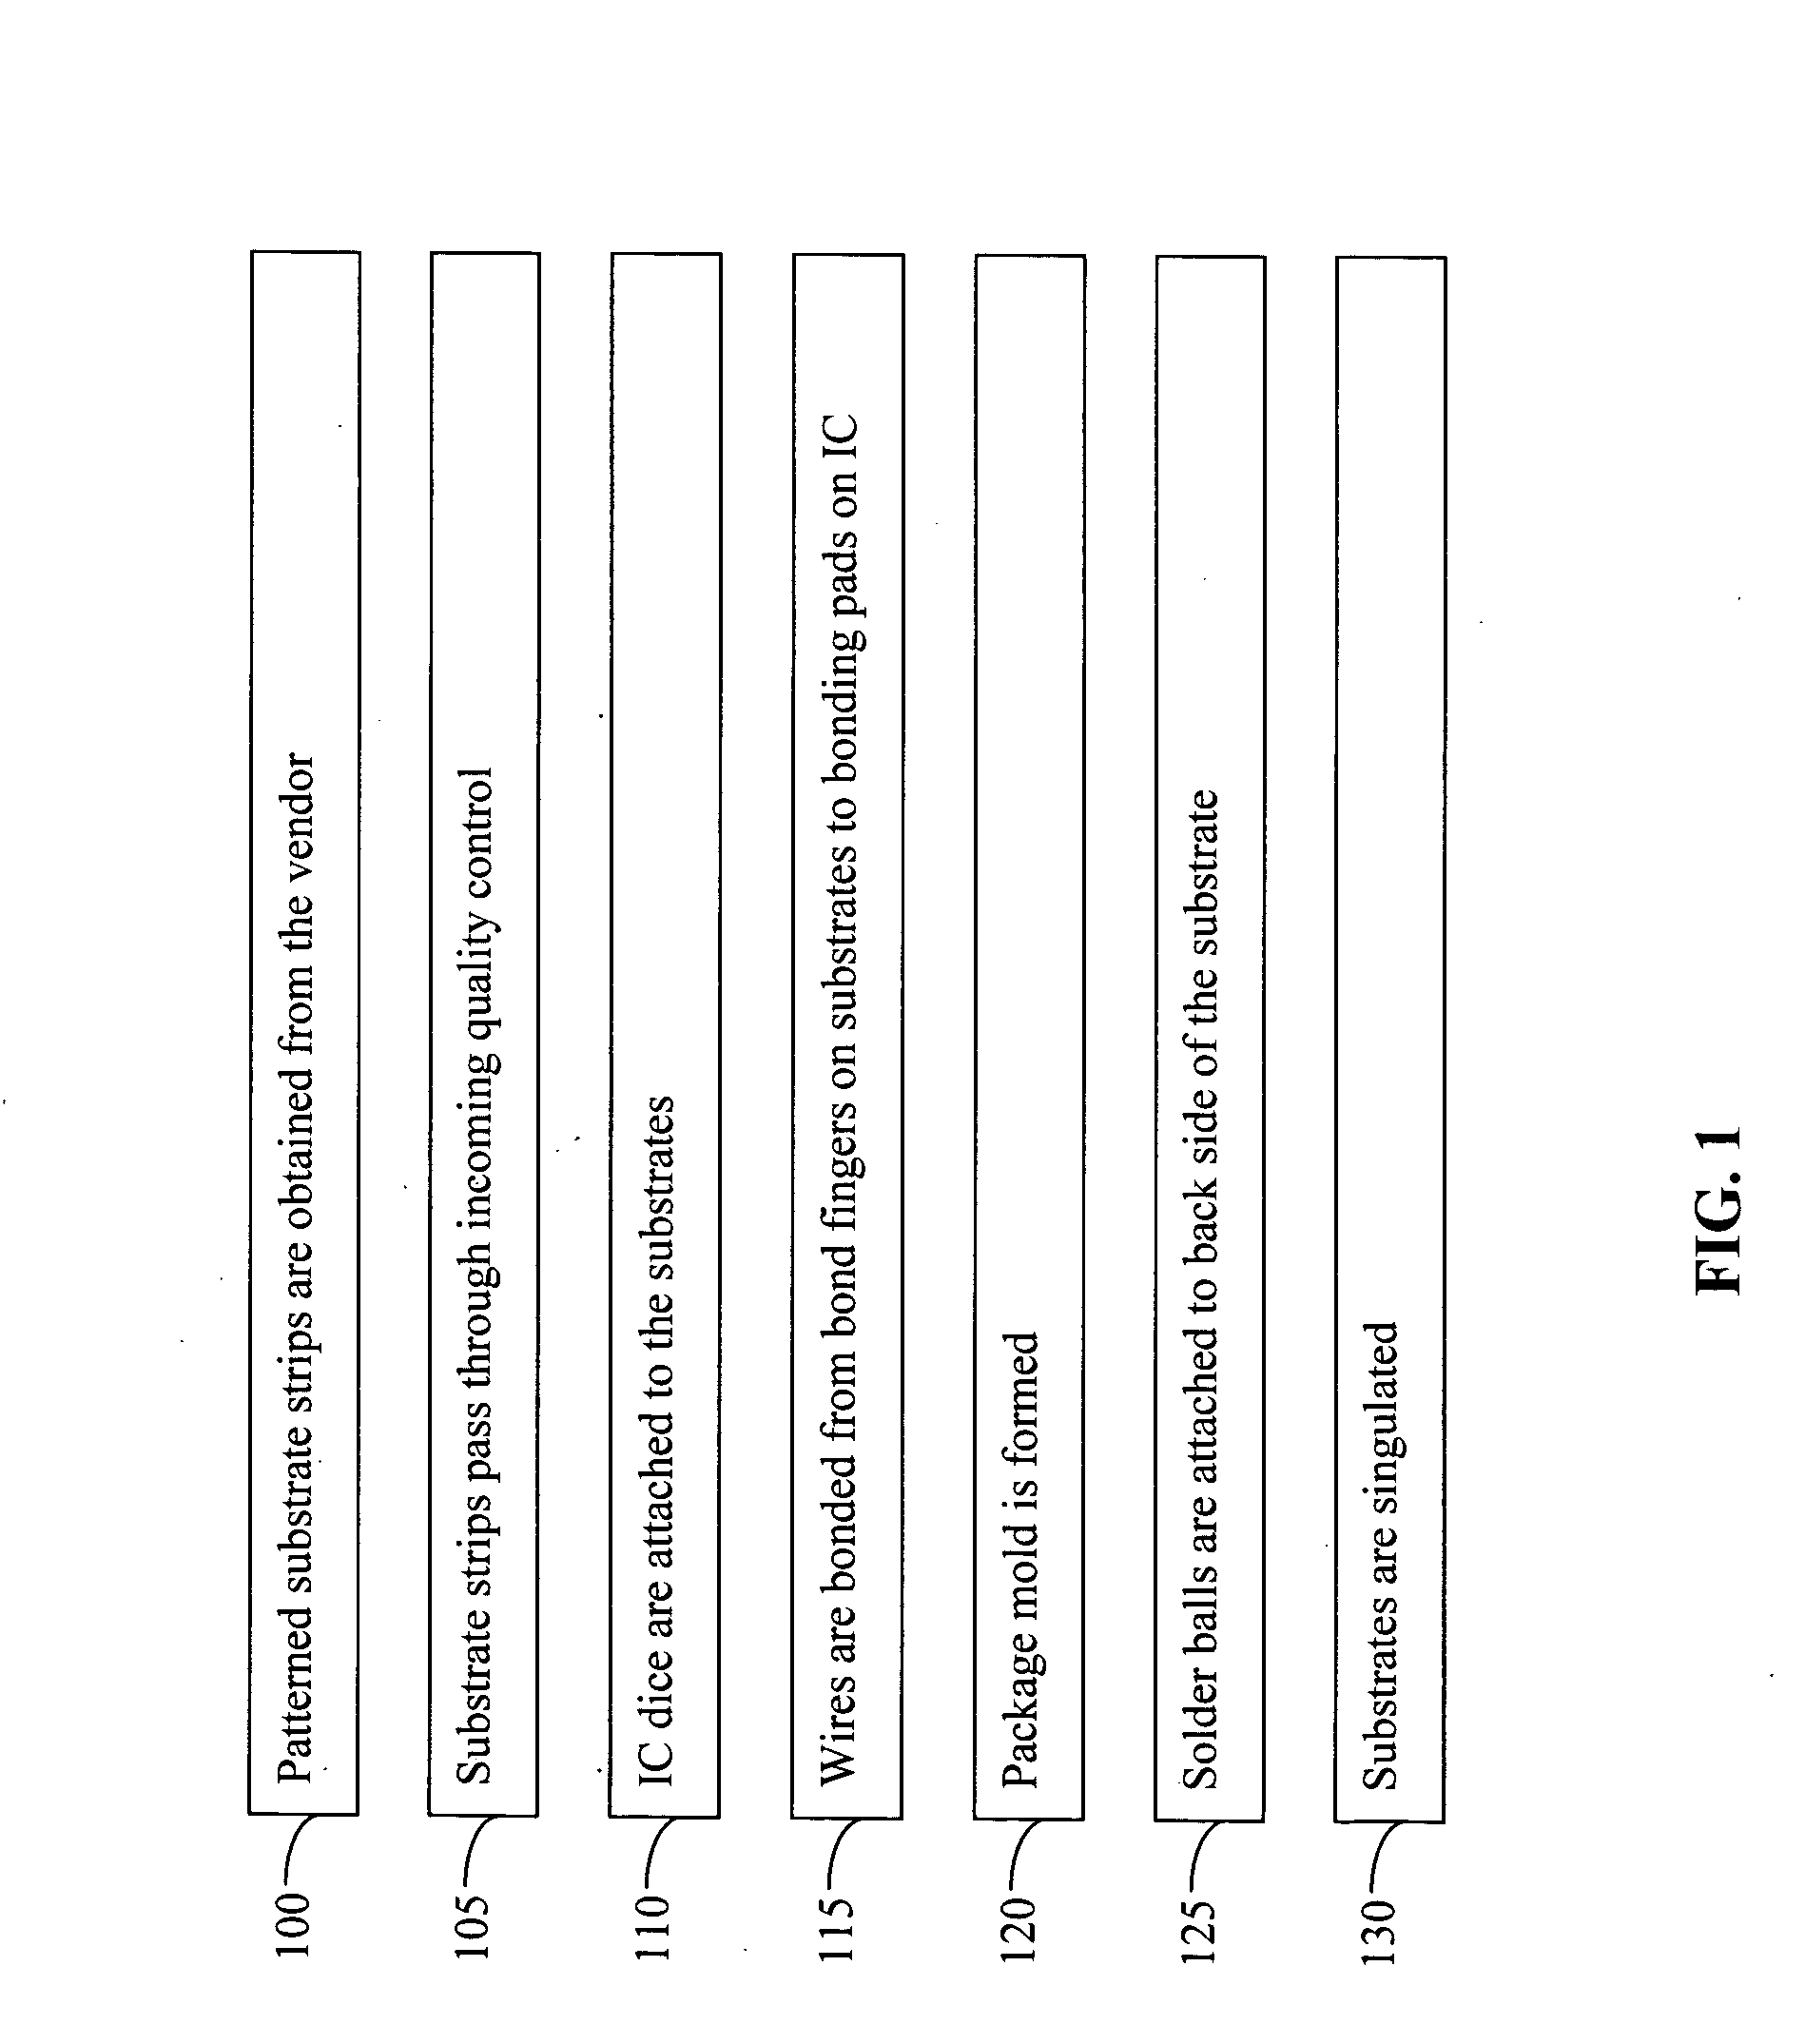 Structure and method for wire bond integrity check on BGA substrates using indirect electrical interconnectivity pathway between wire bonds and ground